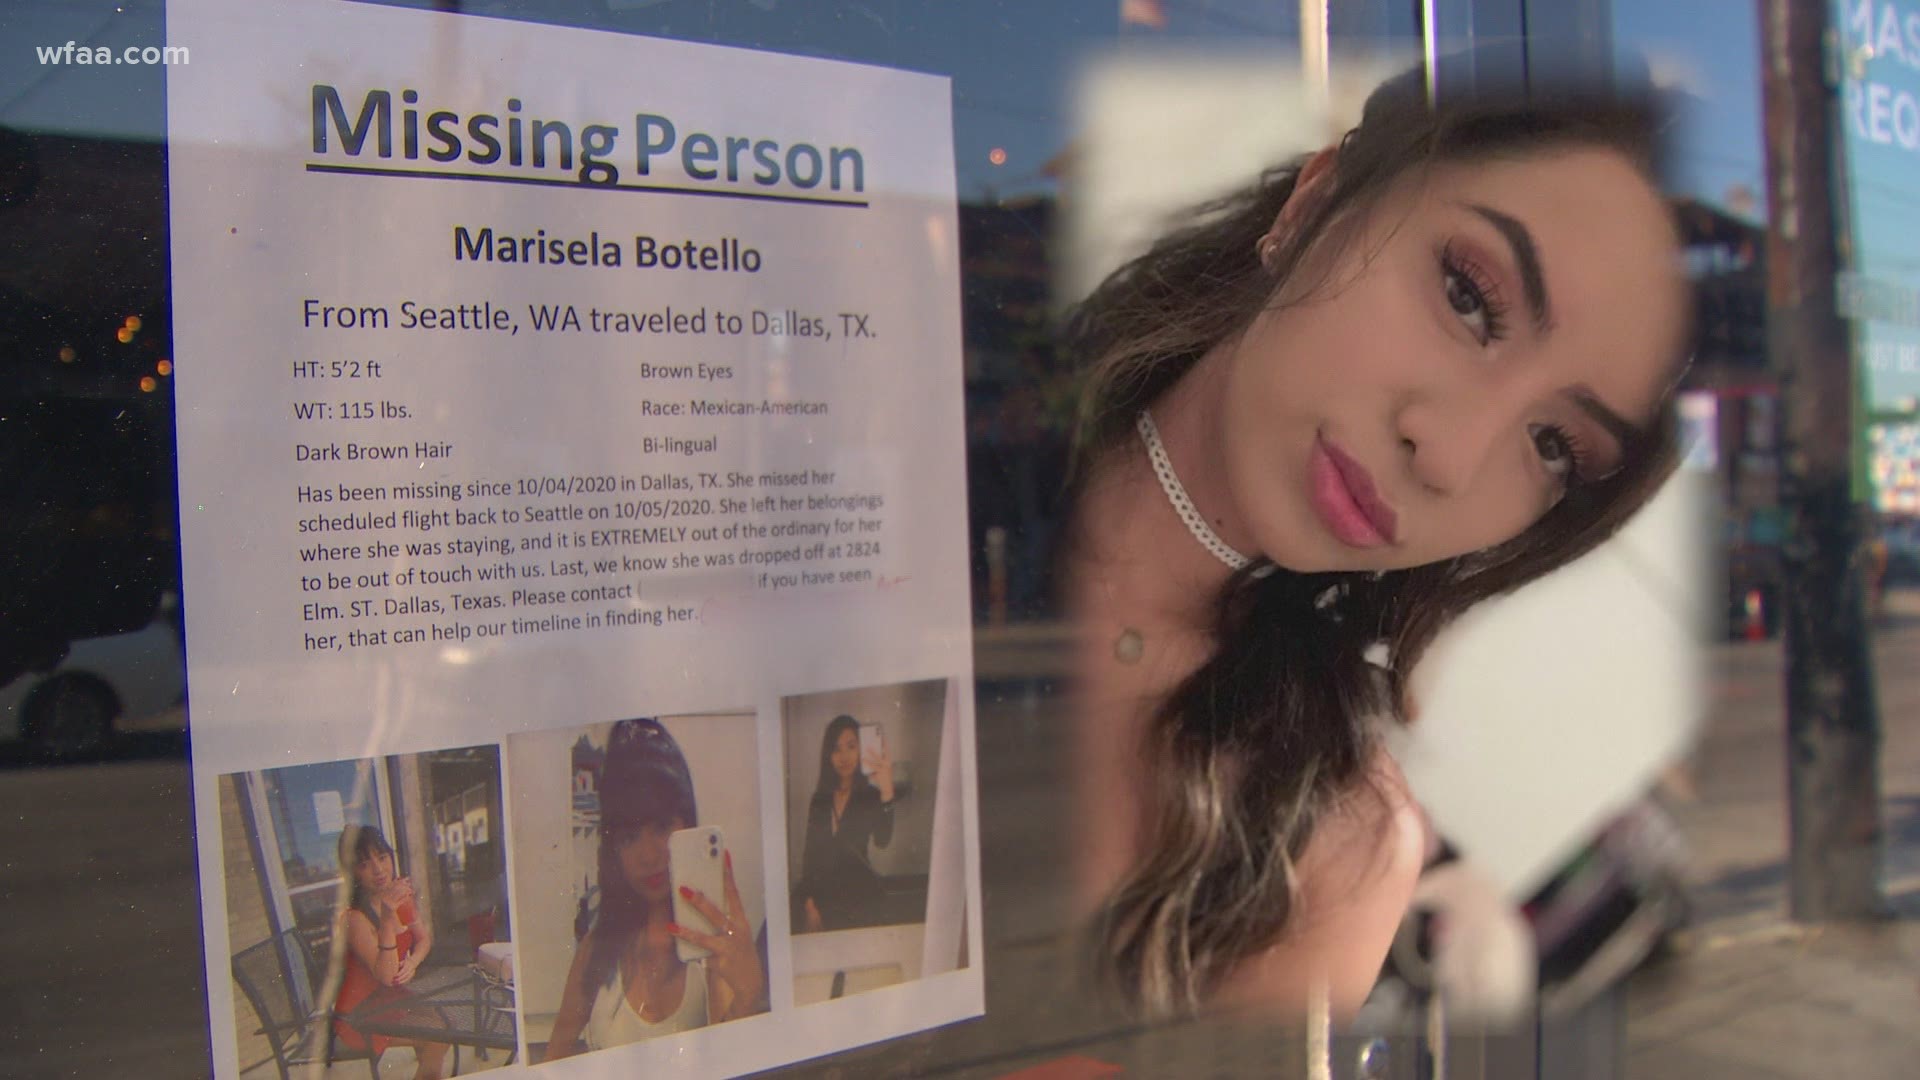 Marisella was last seen Oct. 4 and missed her flight back to Seattle on Oct. 5.